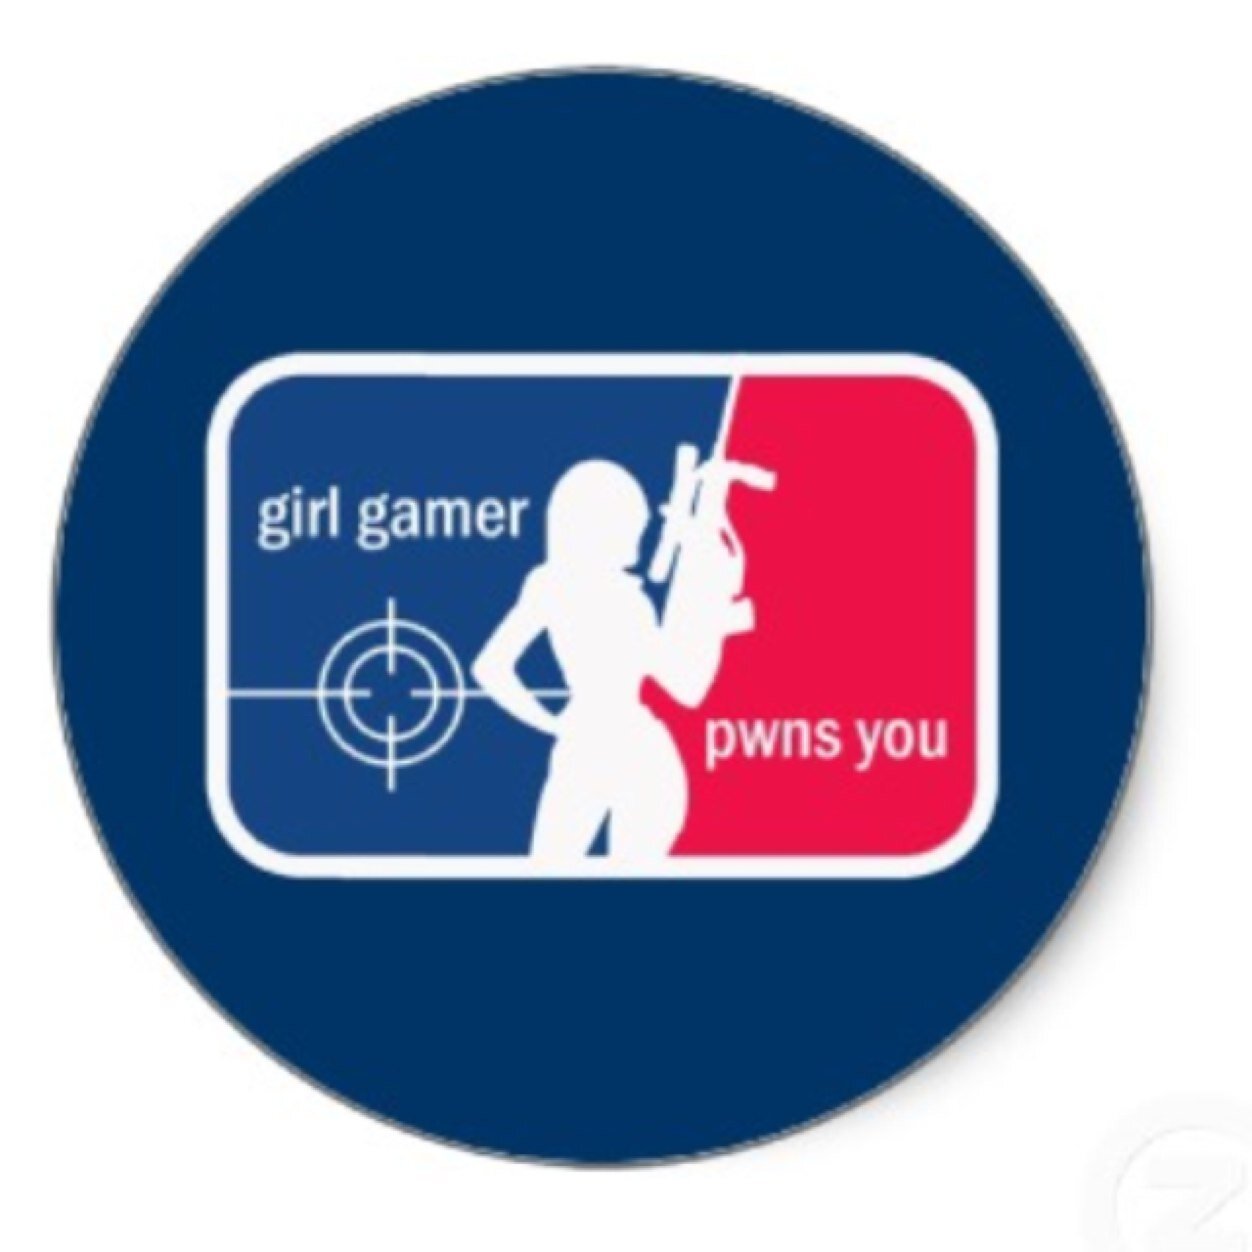 If you enjoy pictures of girl gamers this twitter is for you. @ me with submissions ladies